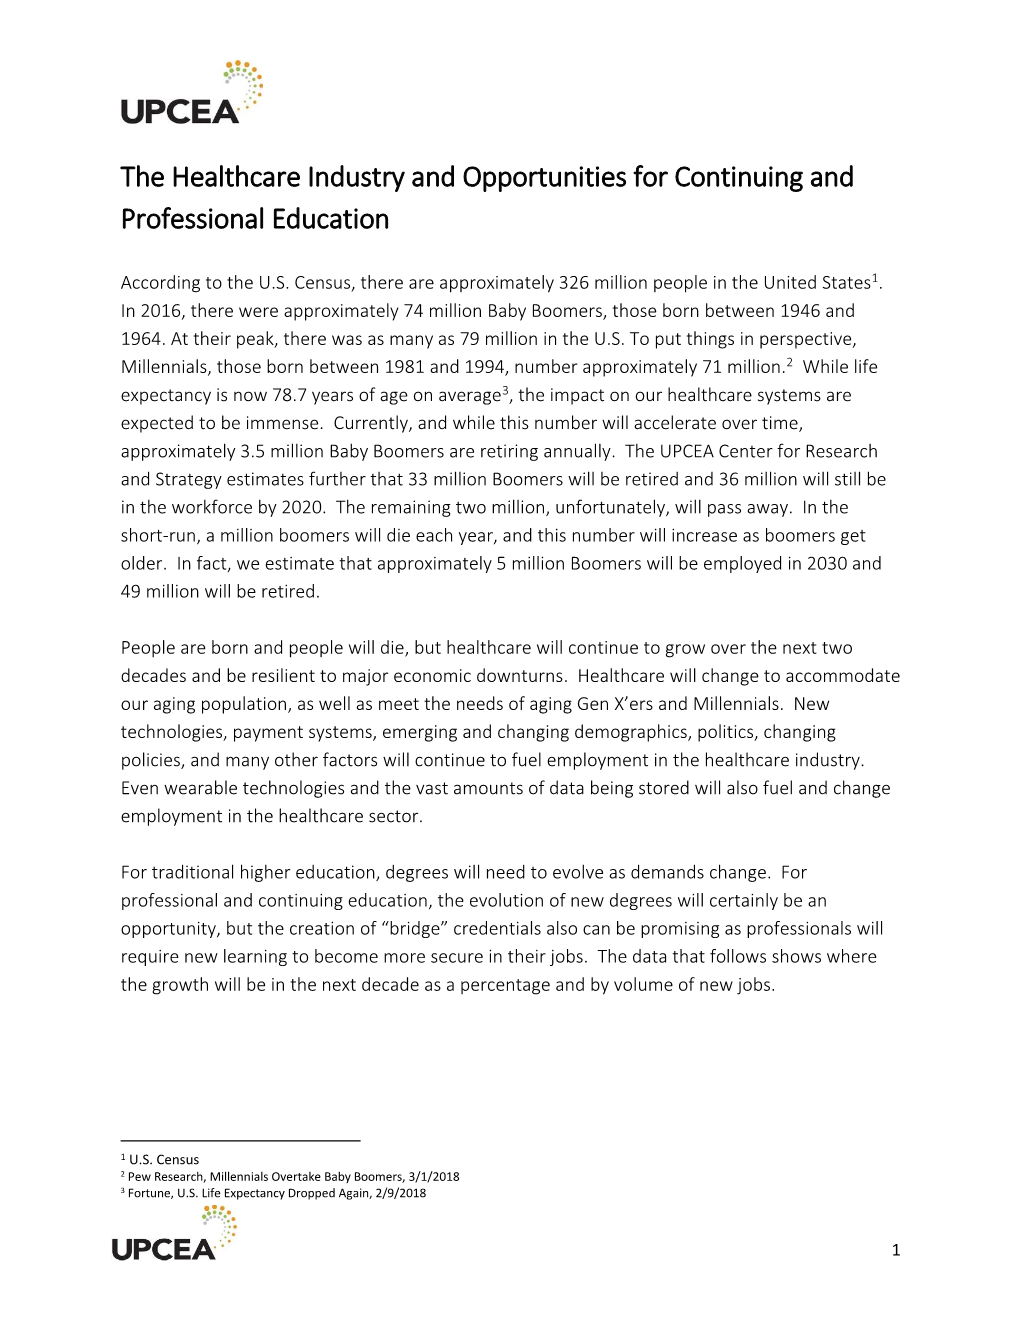 The Healthcare Industry and Opportunities for Continuing and Professional Education